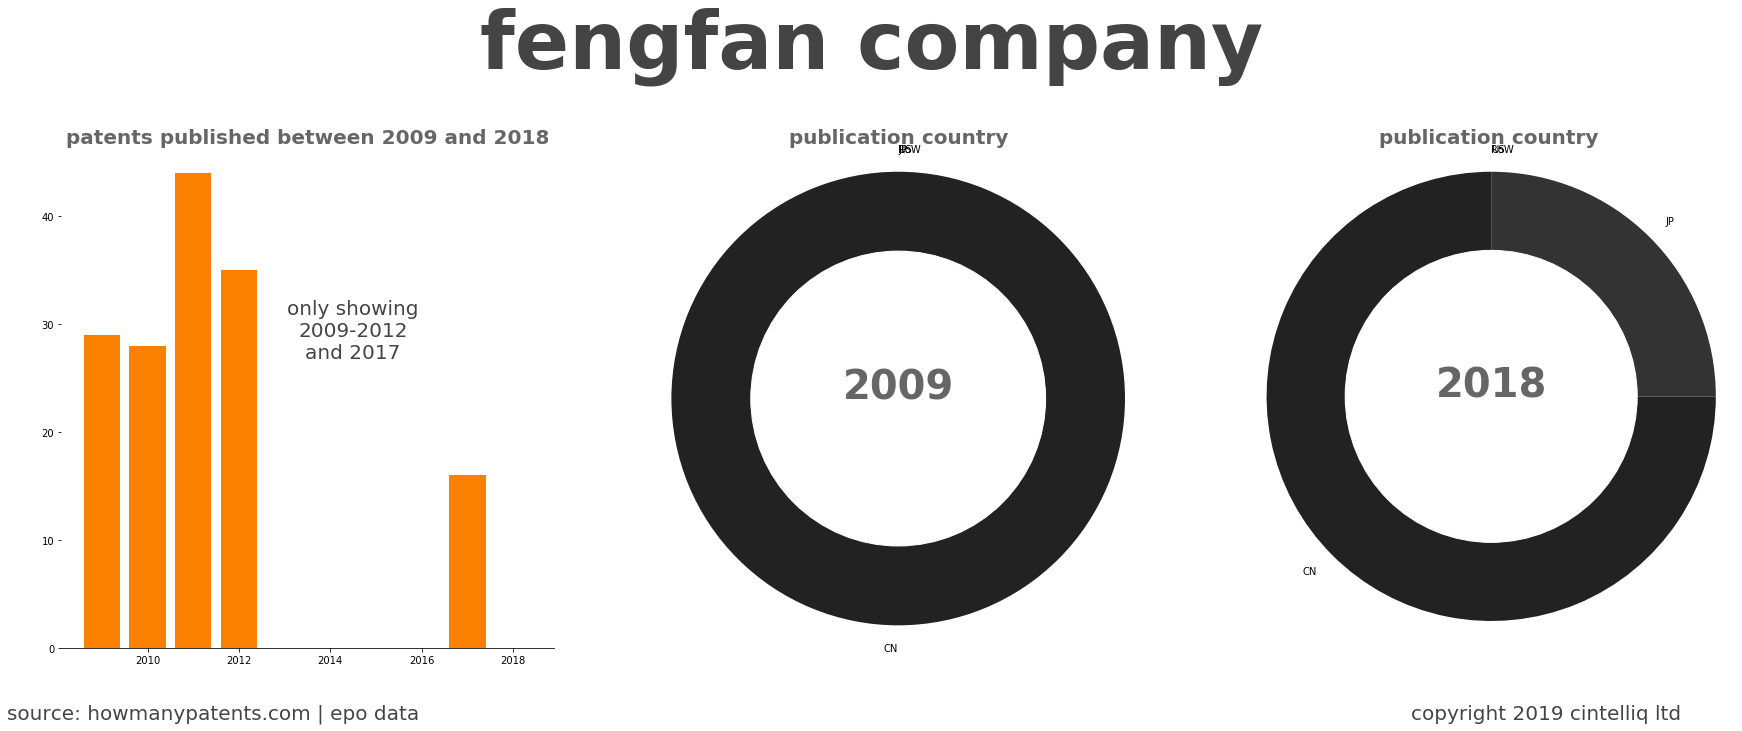 summary of patents for Fengfan Company